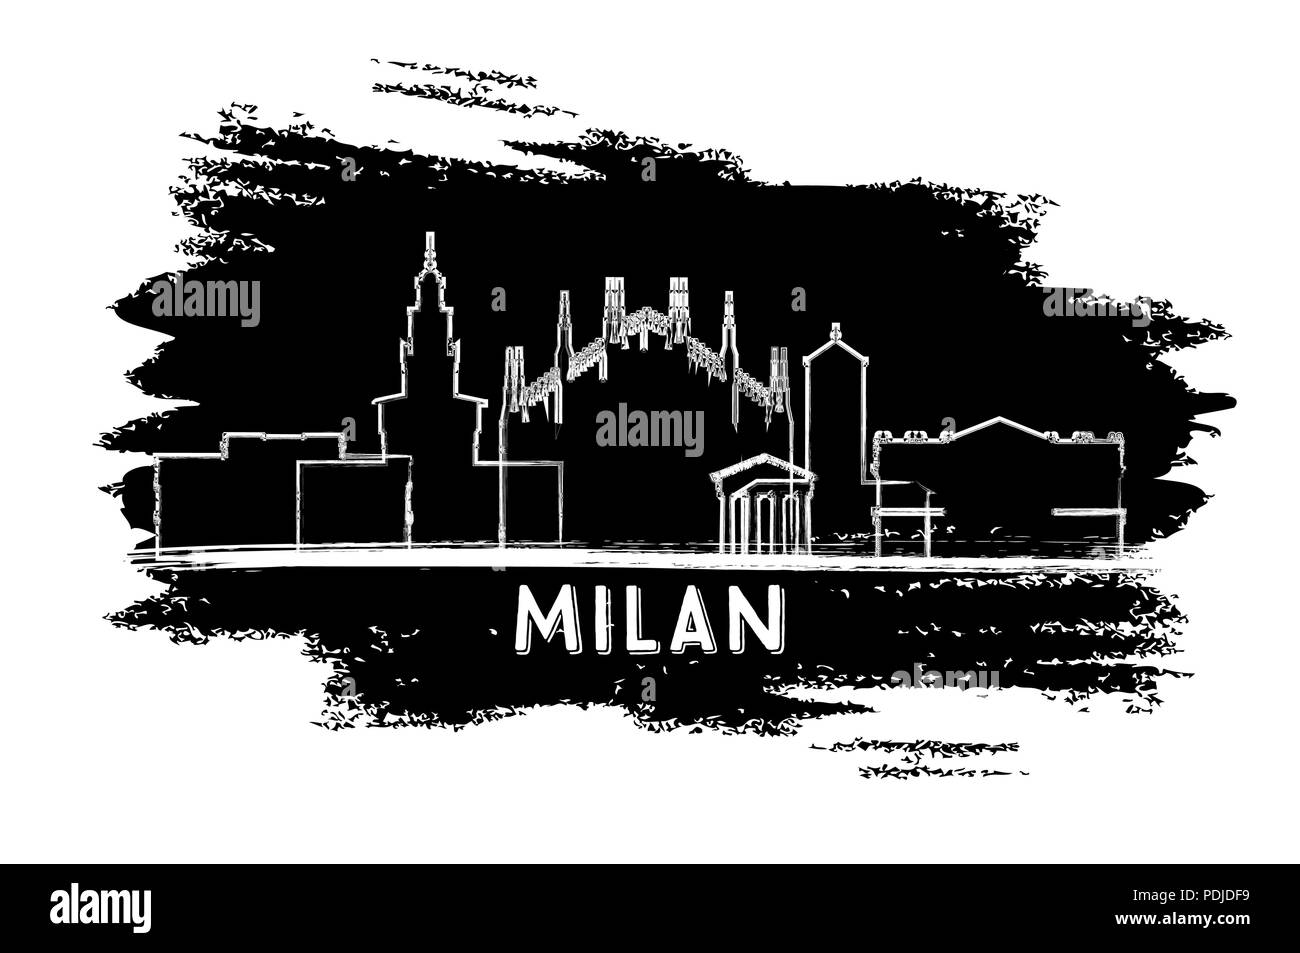 Milan Italy City Skyline Silhouette. Hand Drawn Sketch. Vector Illustration. Business Travel and Tourism Concept with Historic Architecture. Stock Vector